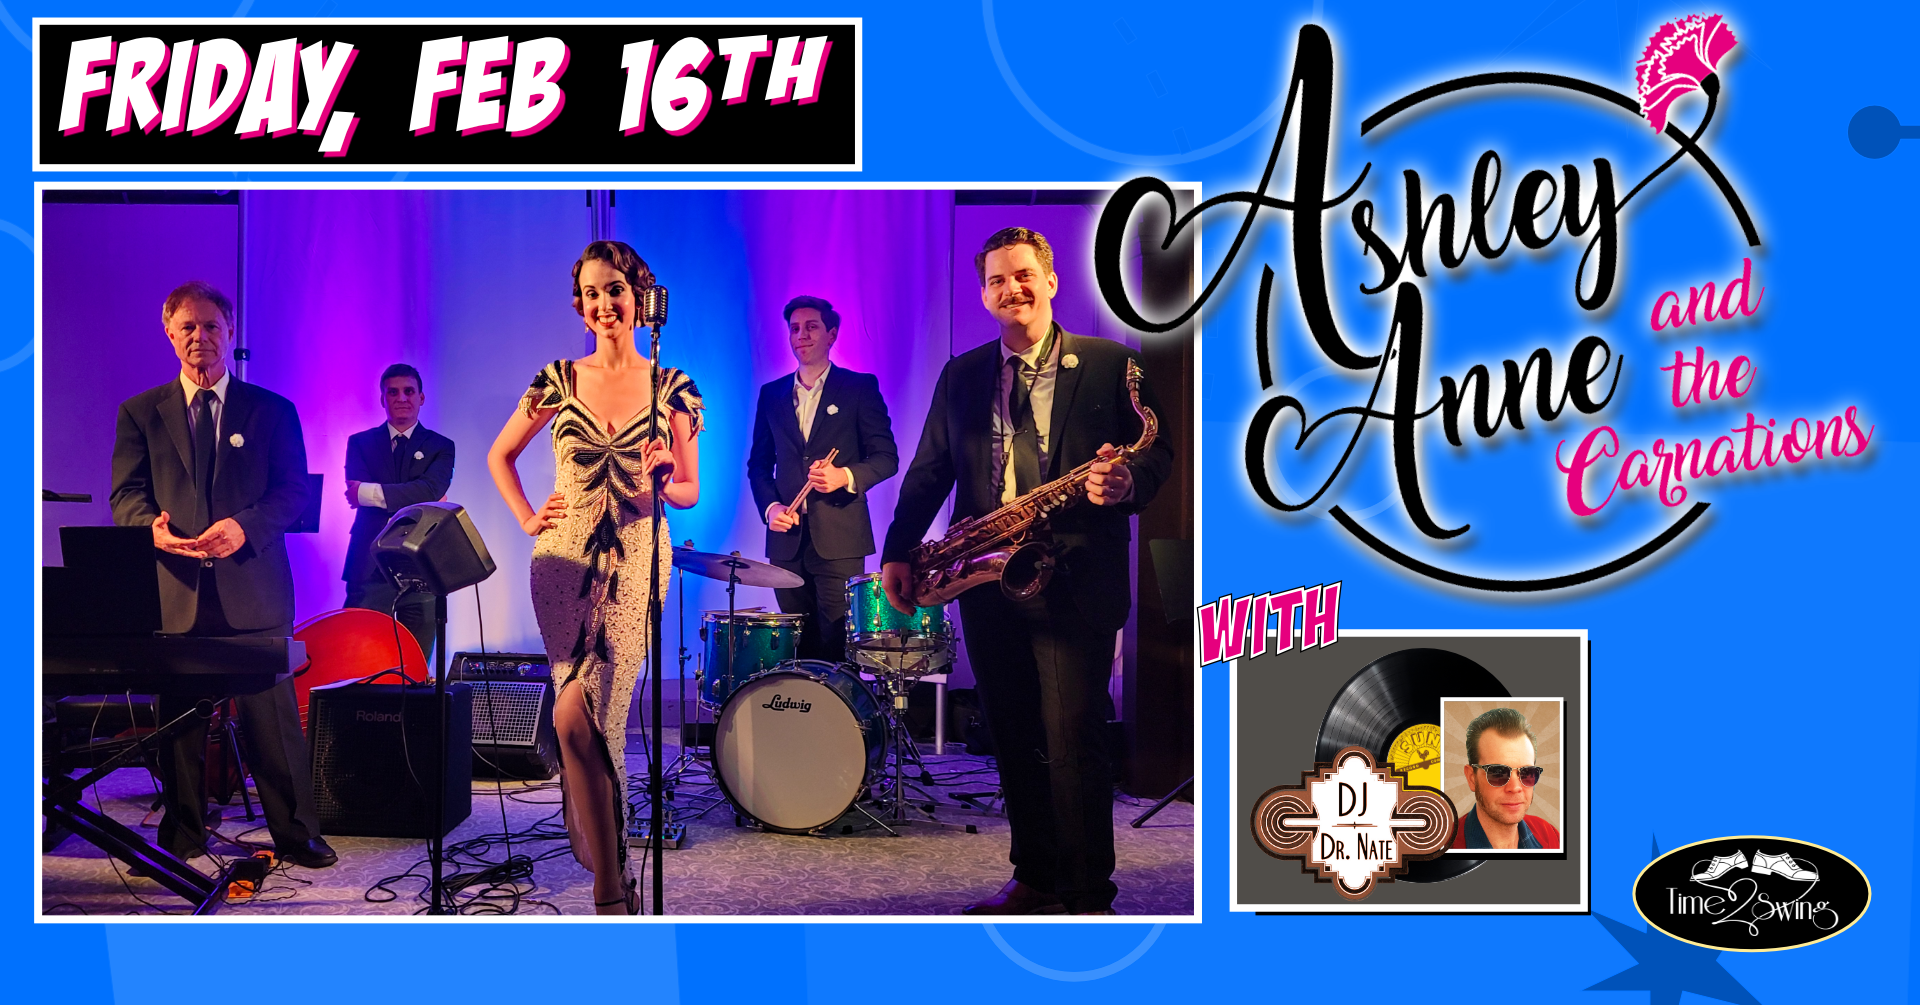 ASHLEY ANNE AND THE CARNATIONS • 1 YEAR ANNIVERSARY SHOW with DJ DR NATE!